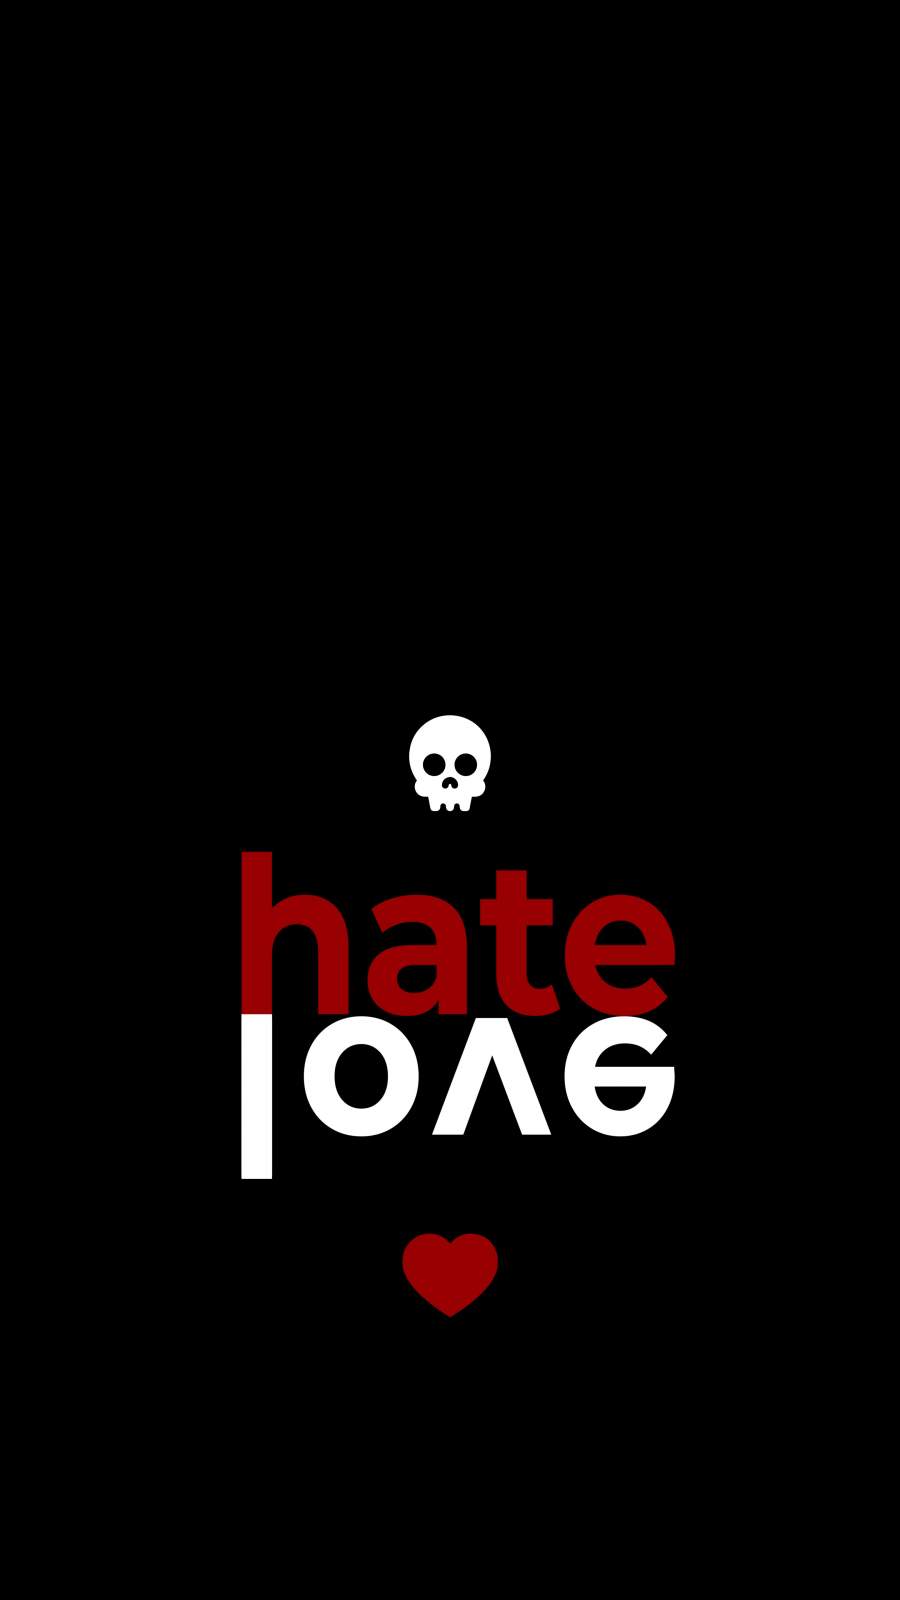 Hate Love - IPhone Wallpapers : iPhone Wallpapers